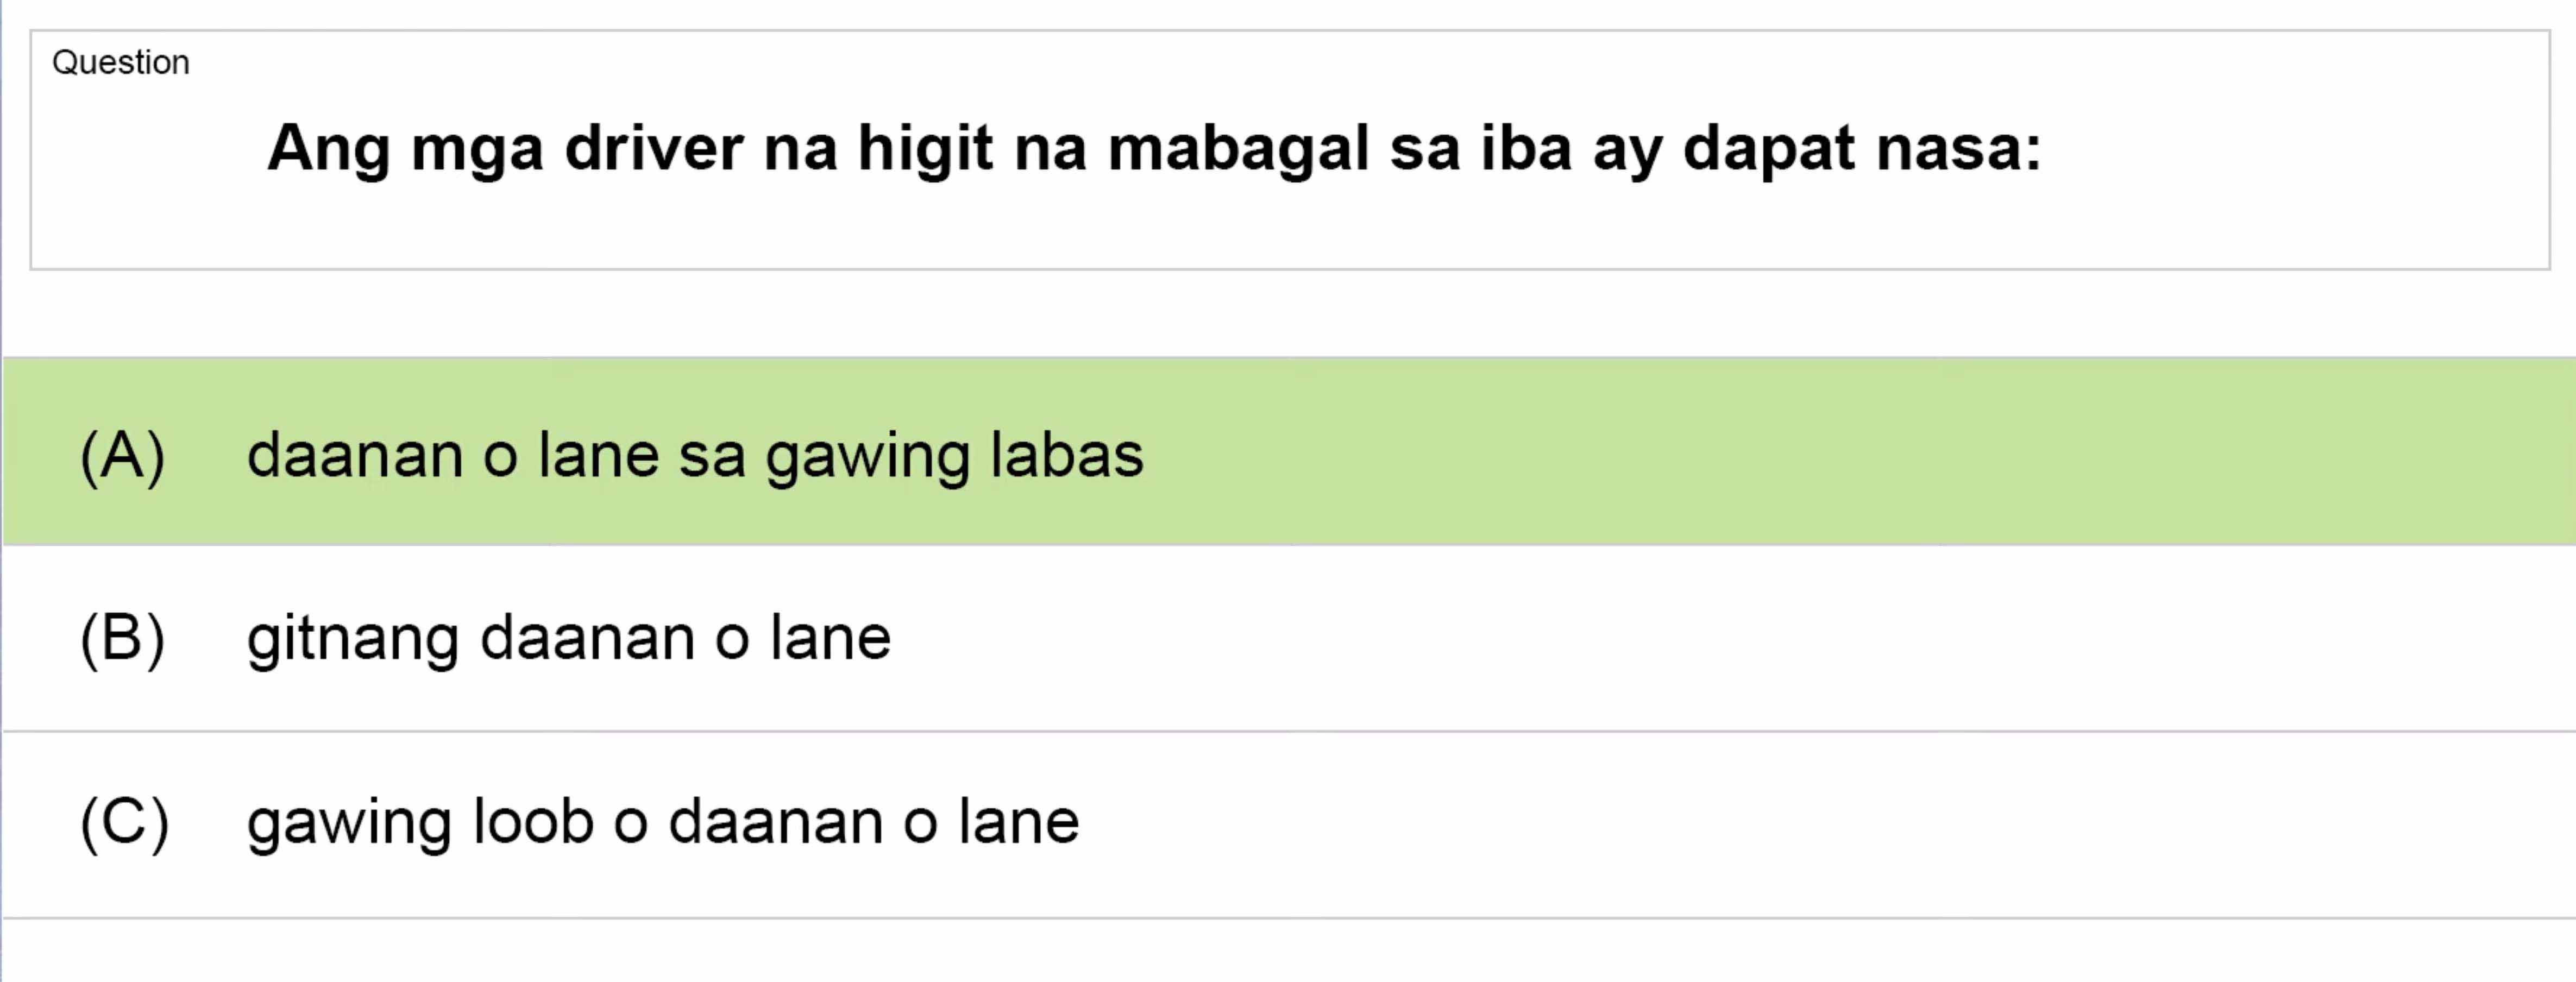 LTO Tagalog non professional exam reviewer light vehicle 3 (28)